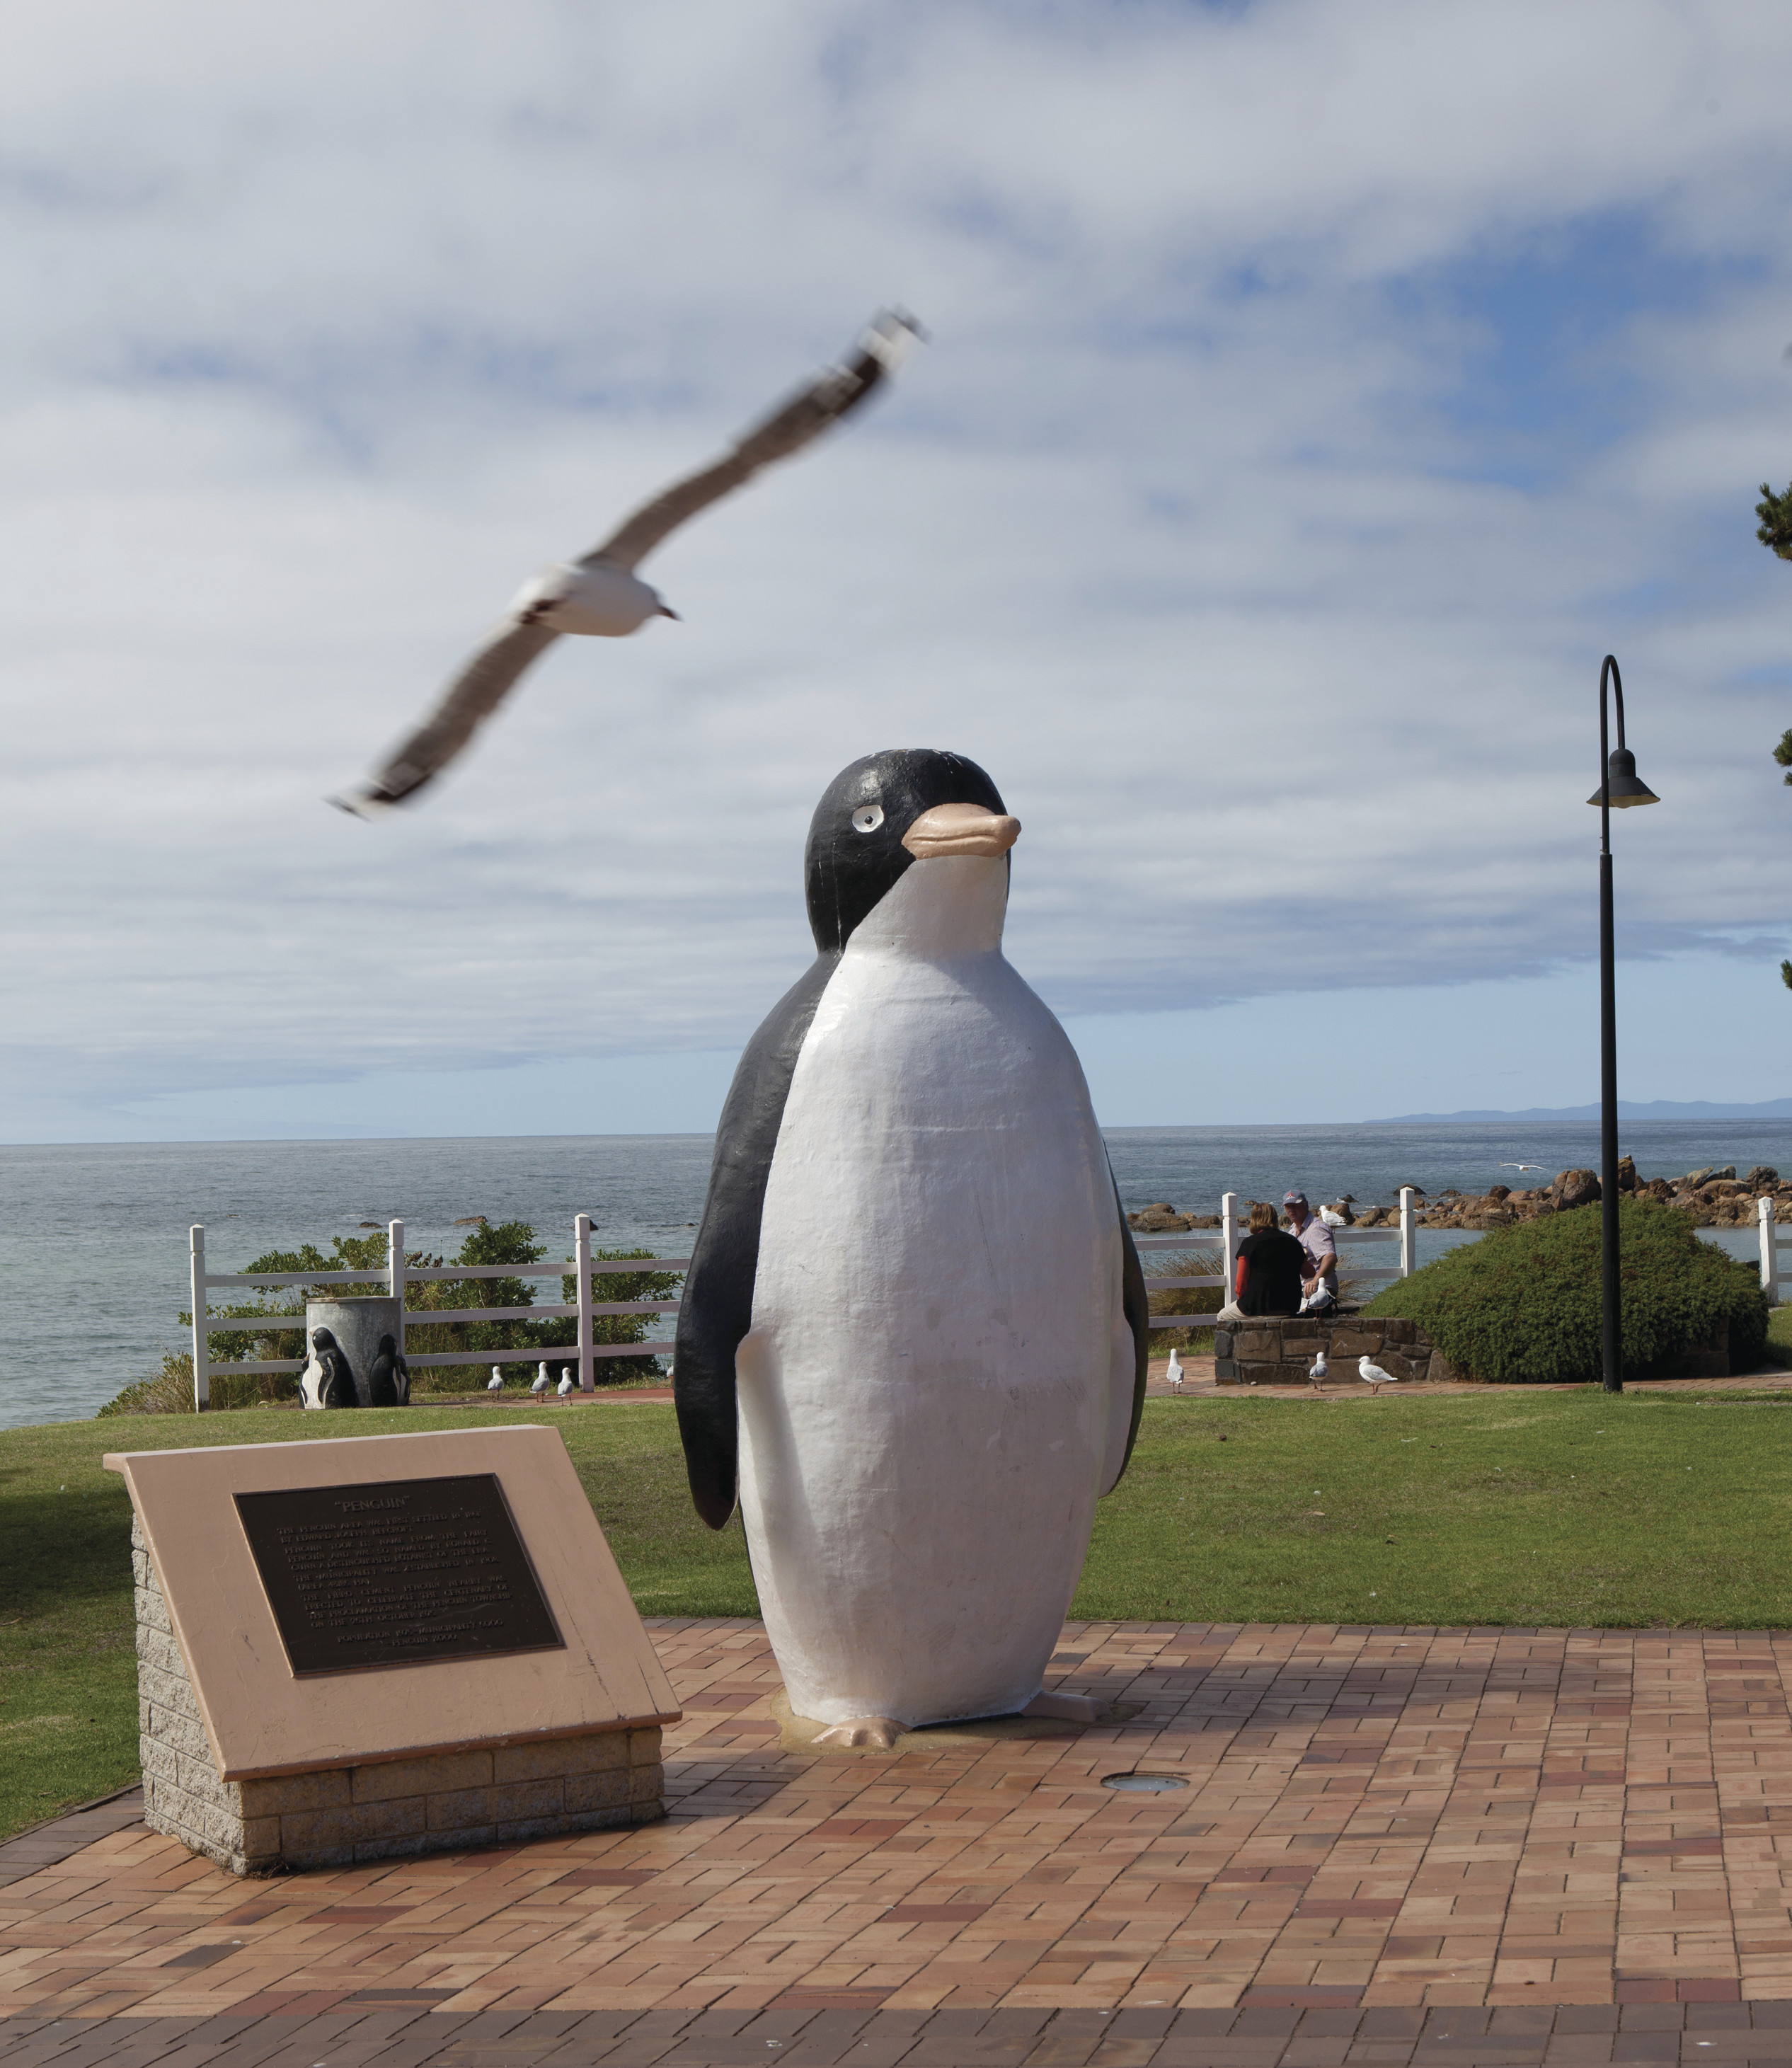 Image of a large penguin statue situated in the town named Penguin.